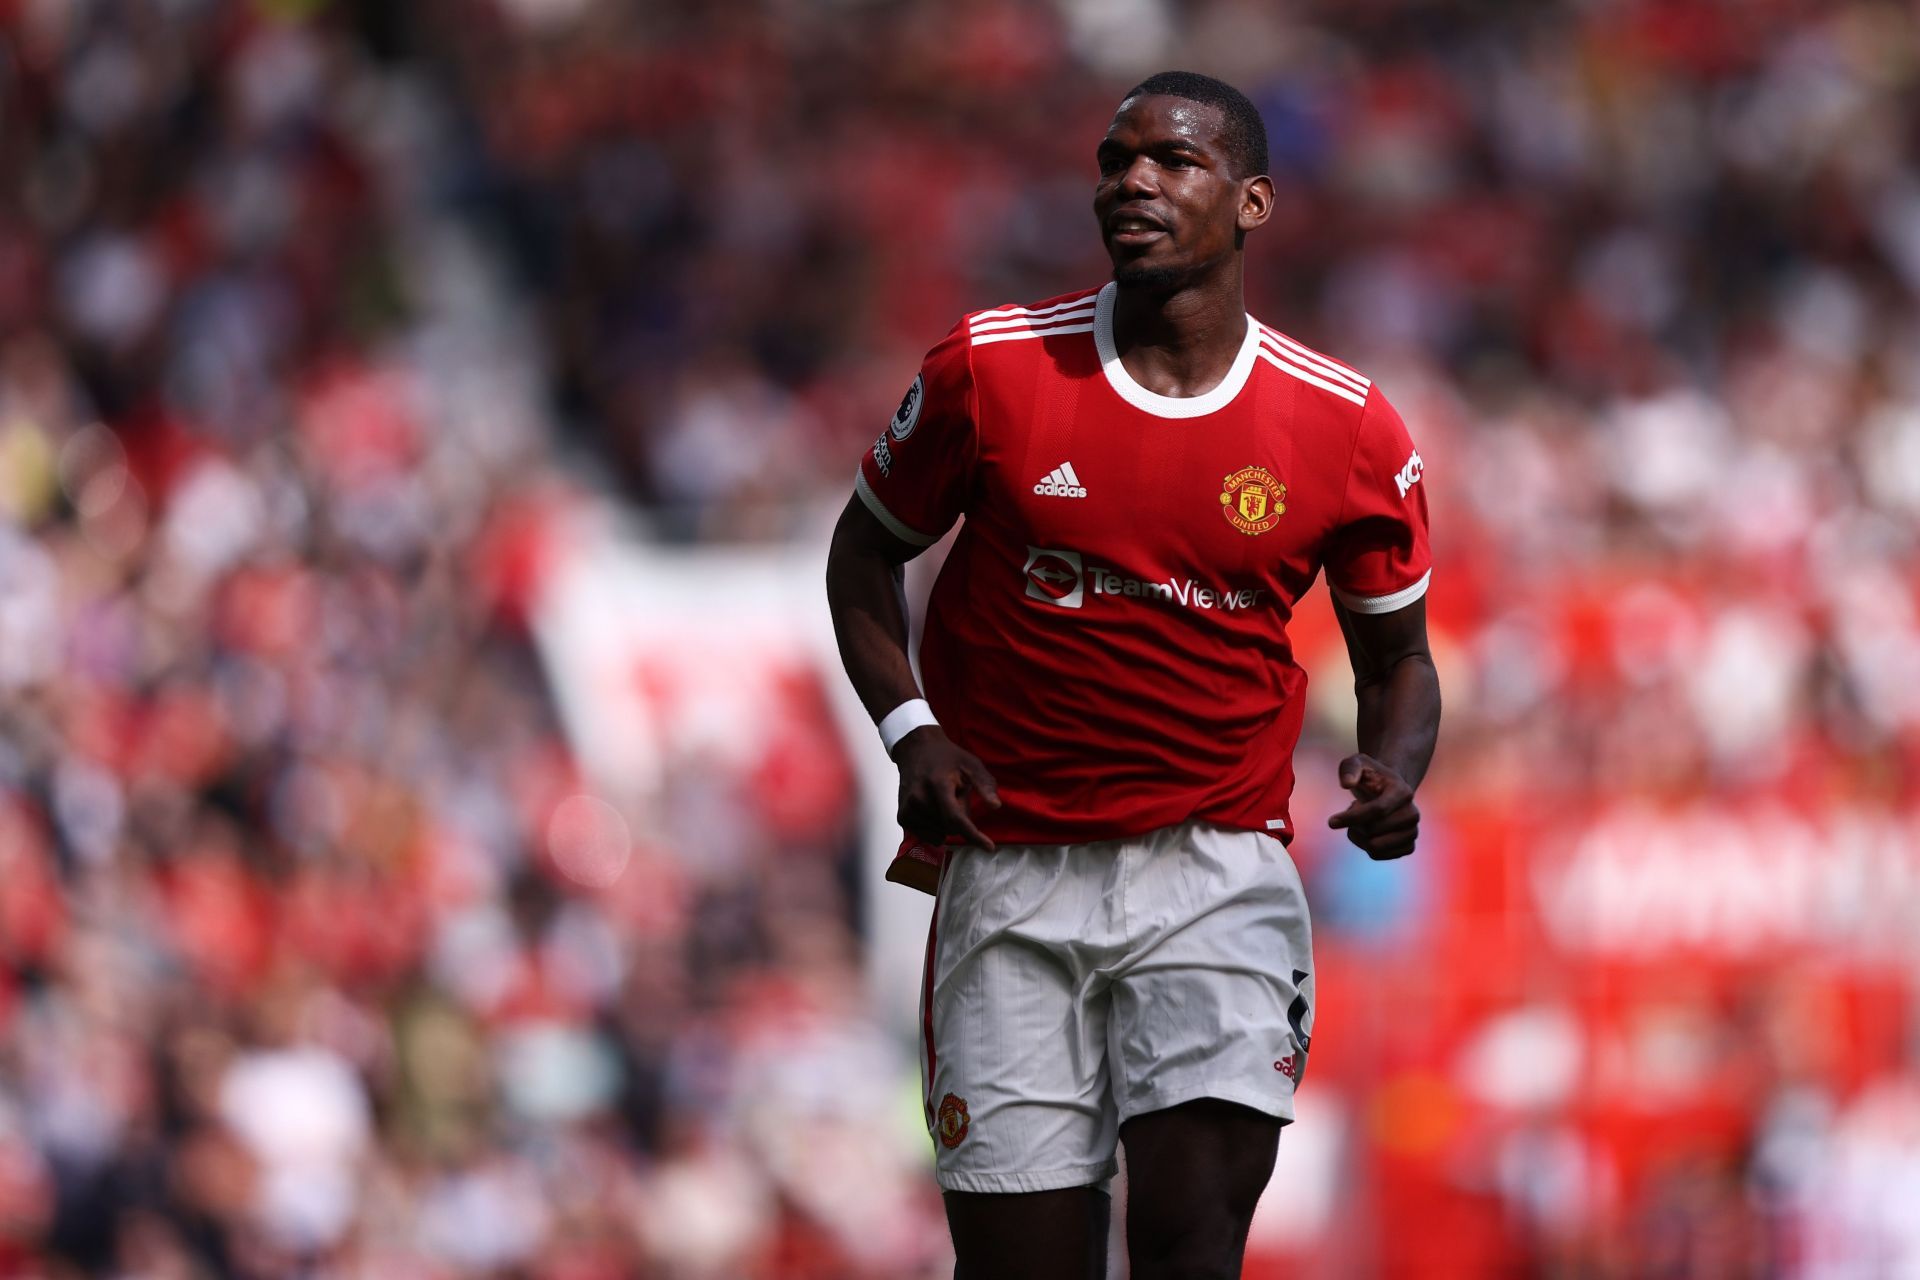 Paul Pogba is set to leave ManchesterUnited this summer